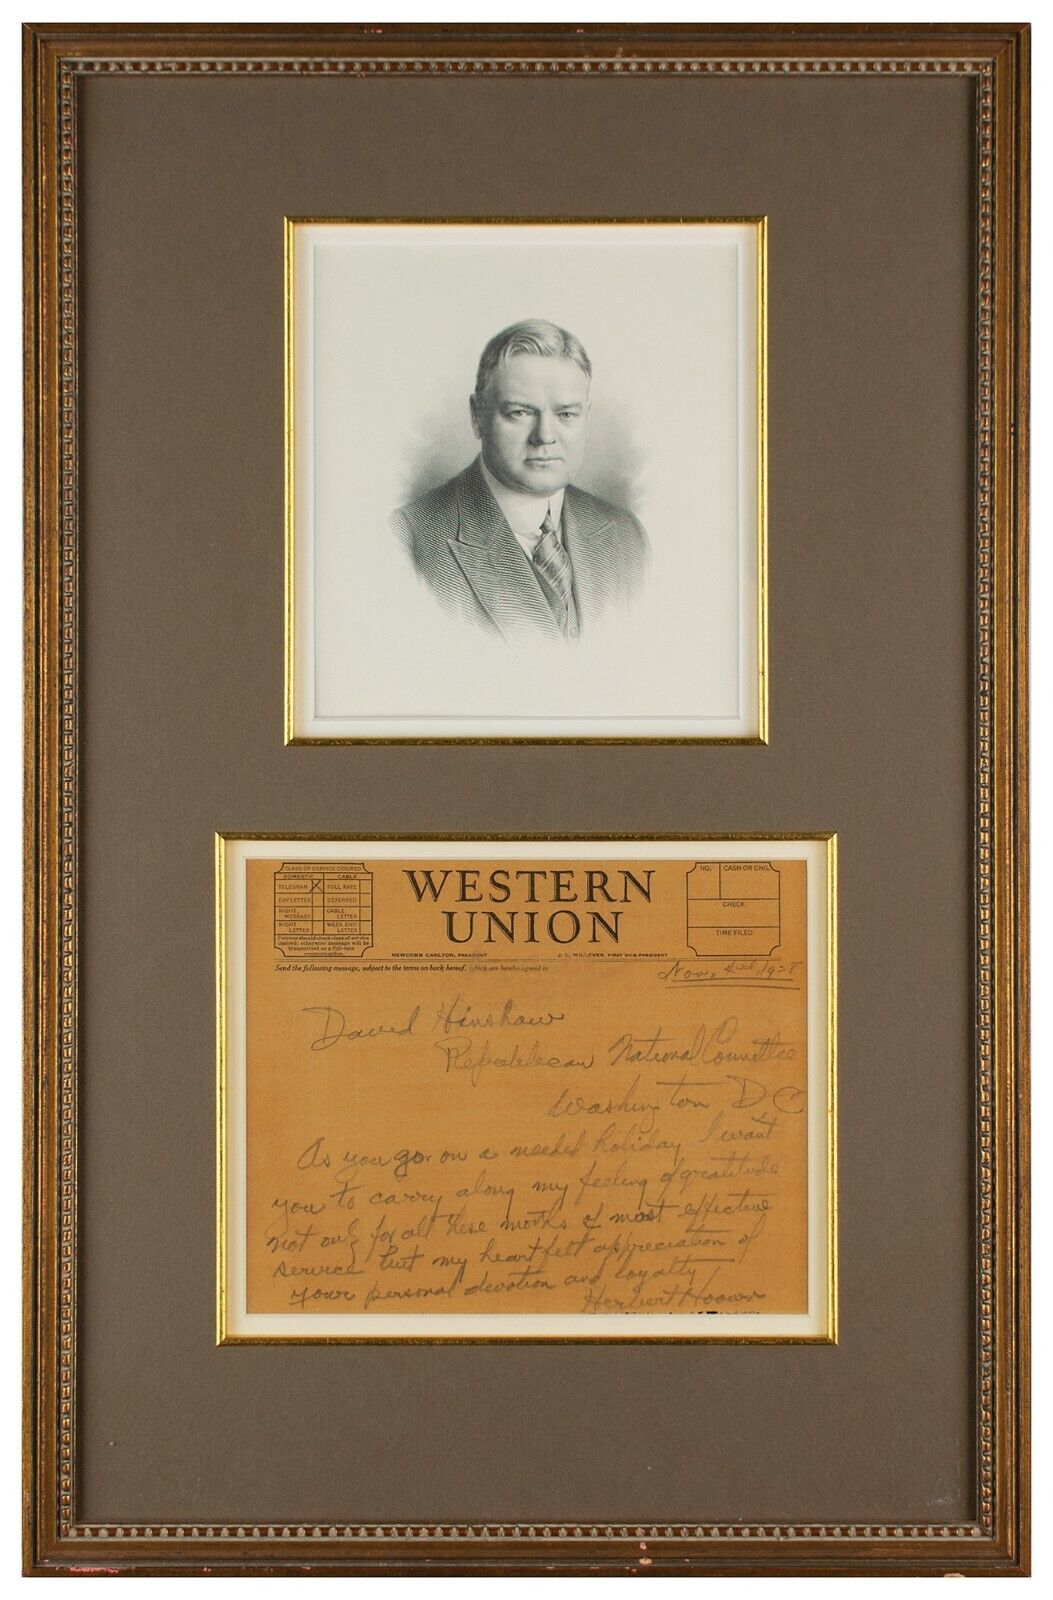 Herbert Hoover - Autograph Letter Signed on 11-4-1928 - Two Days Before Election